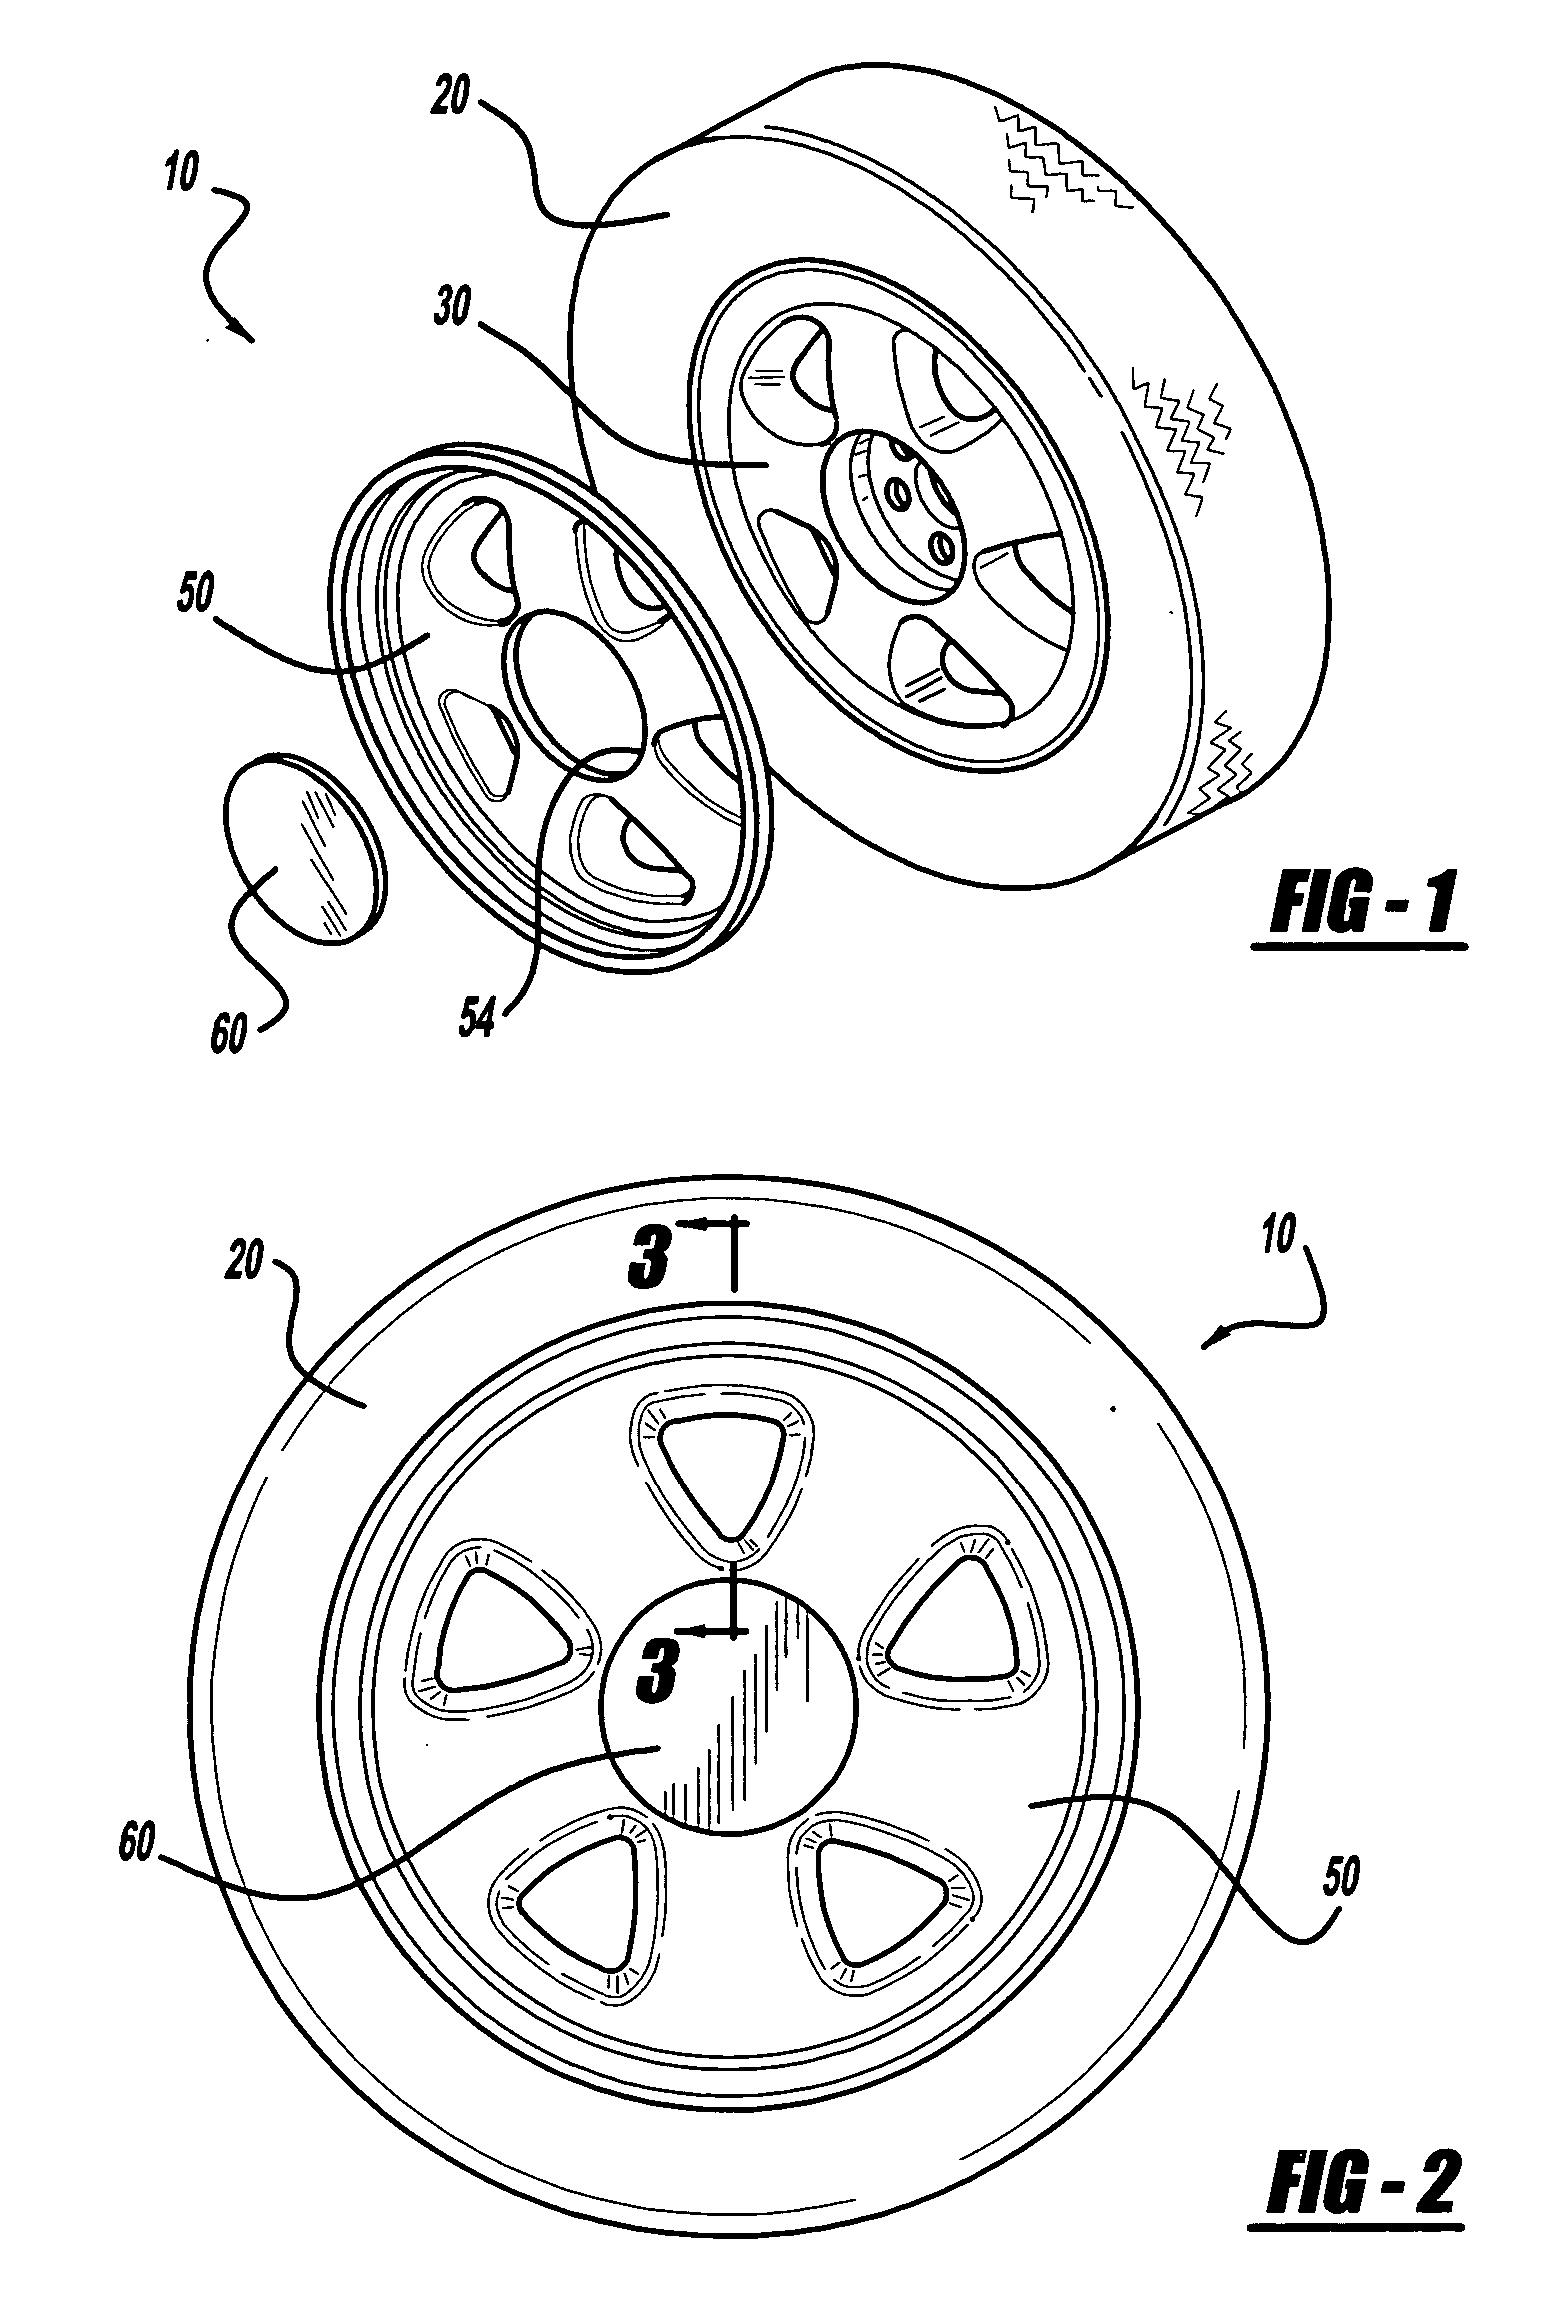 Vehicle wheel and overlay assembly